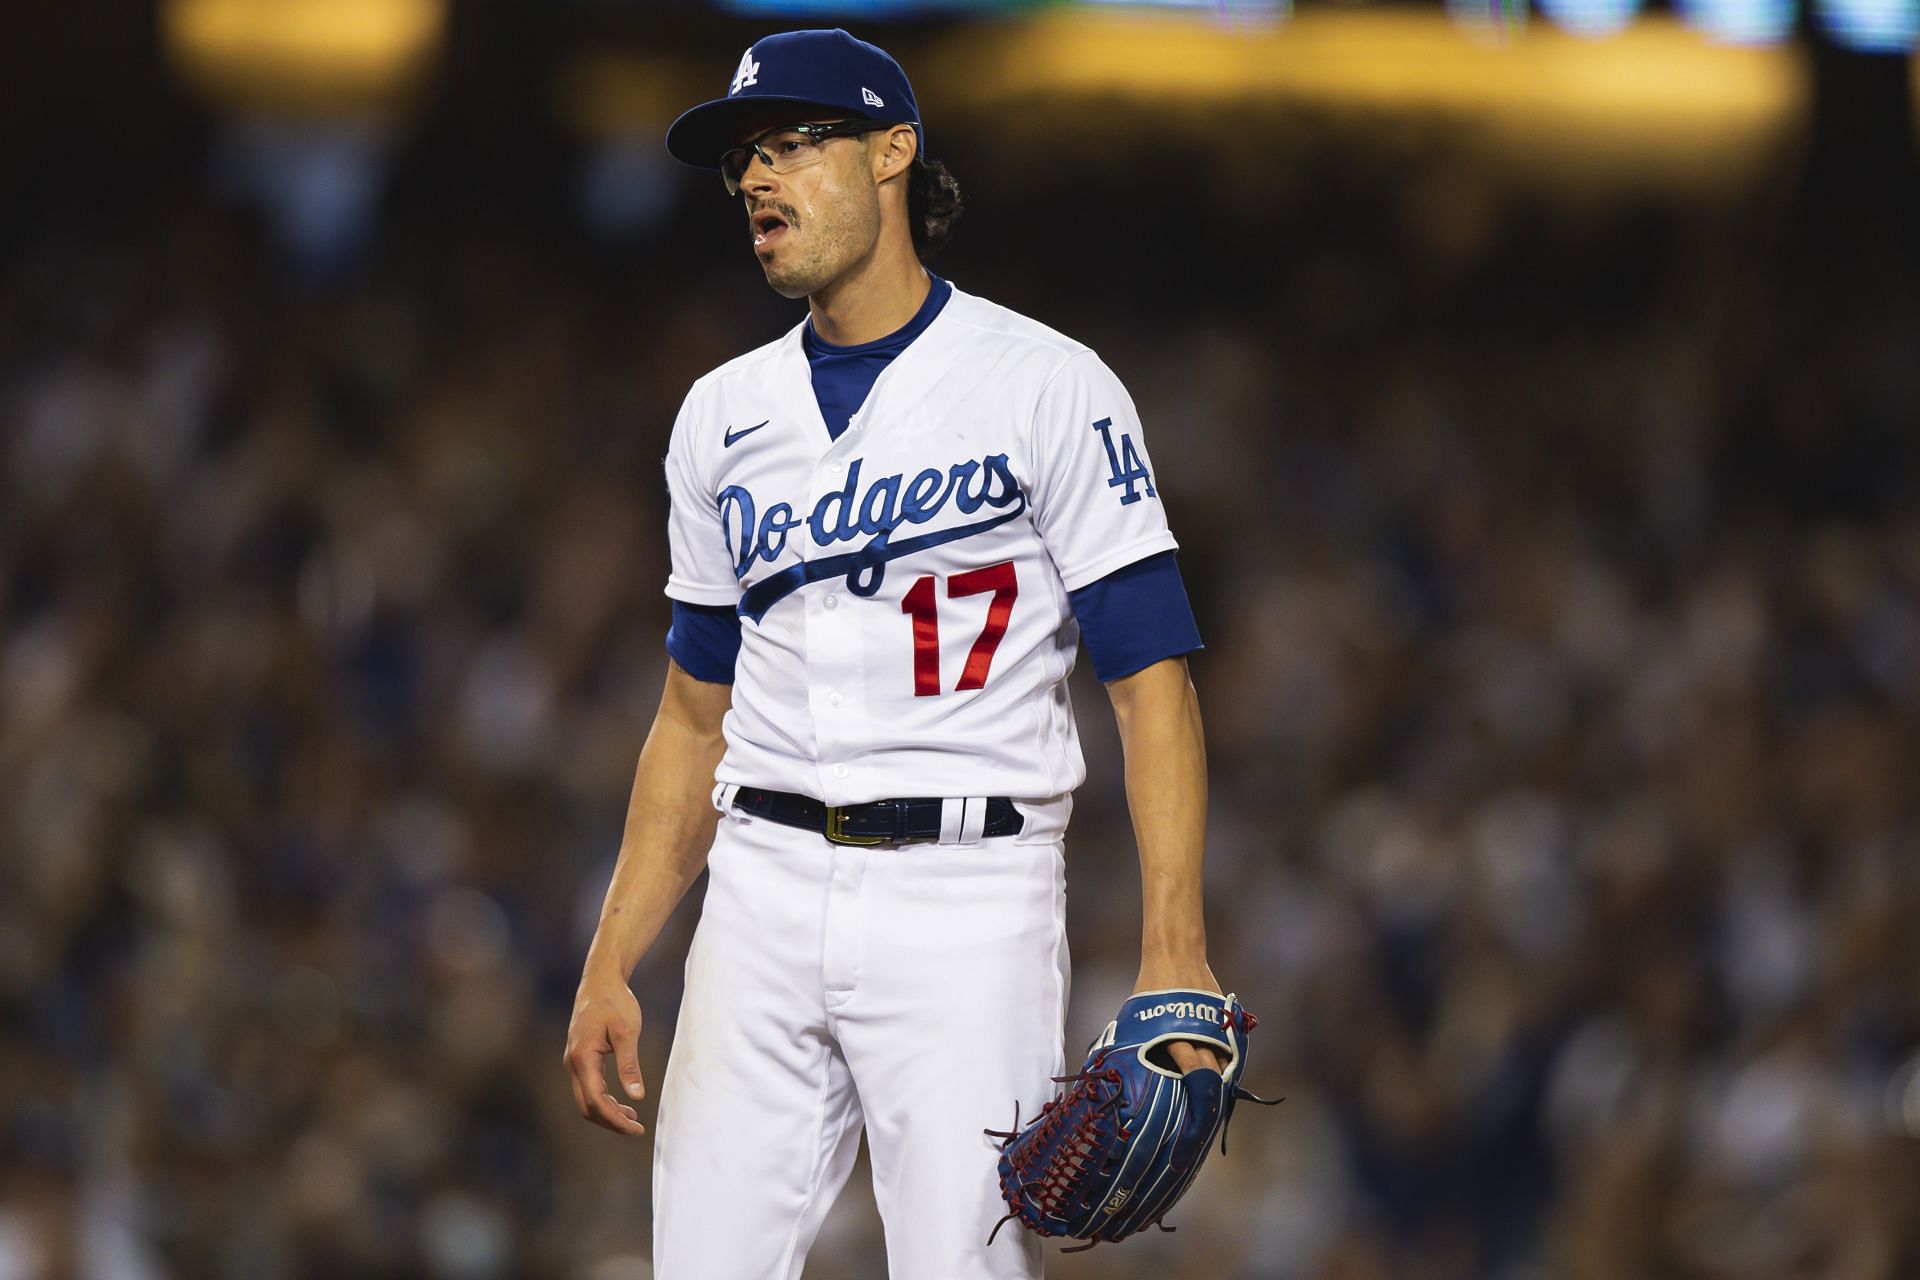 Relief pitcher Joe Kelly used to play for the Los Angeles Dodgers. He now pitches for the Chicago White Sox.